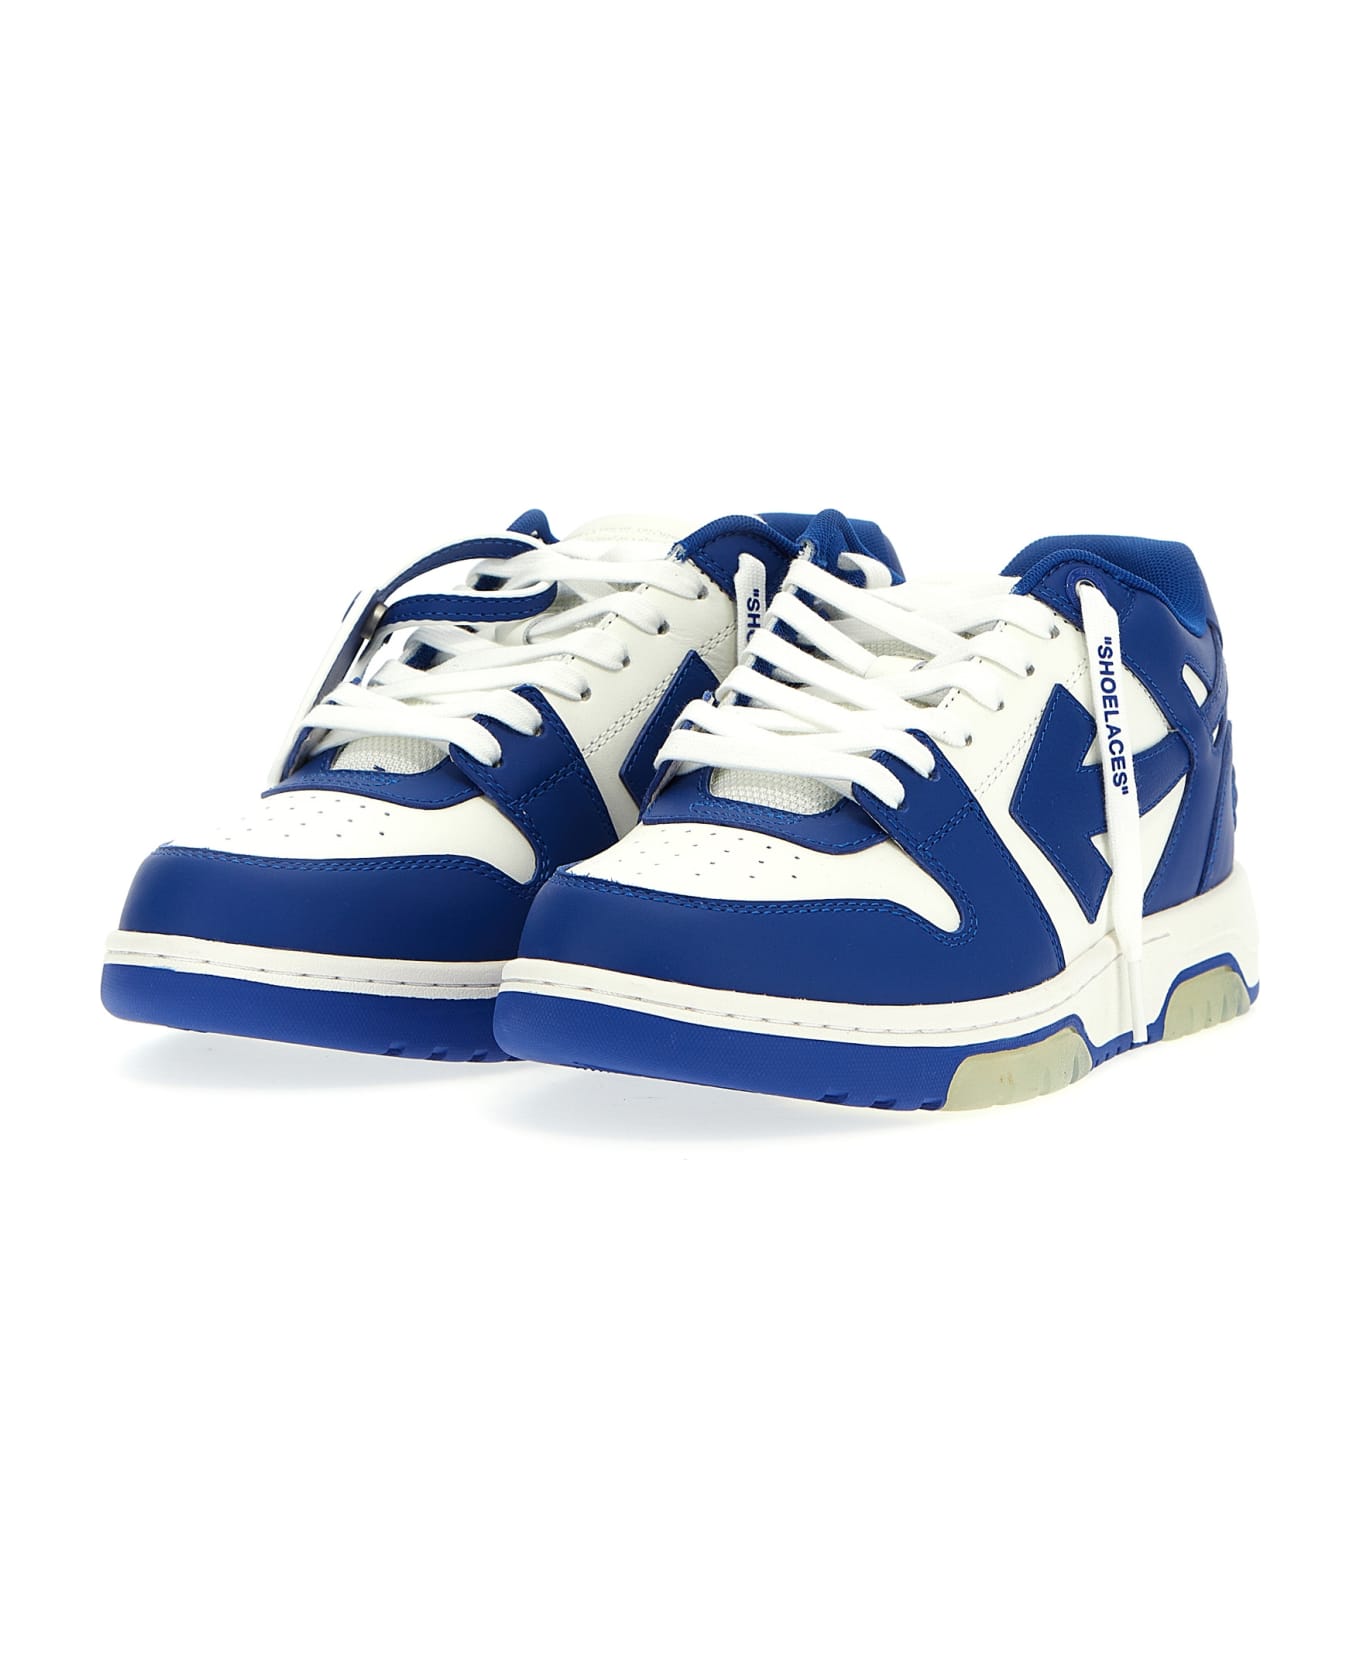 Off-White 'out Of Office' Sneakers - Blue スニーカー